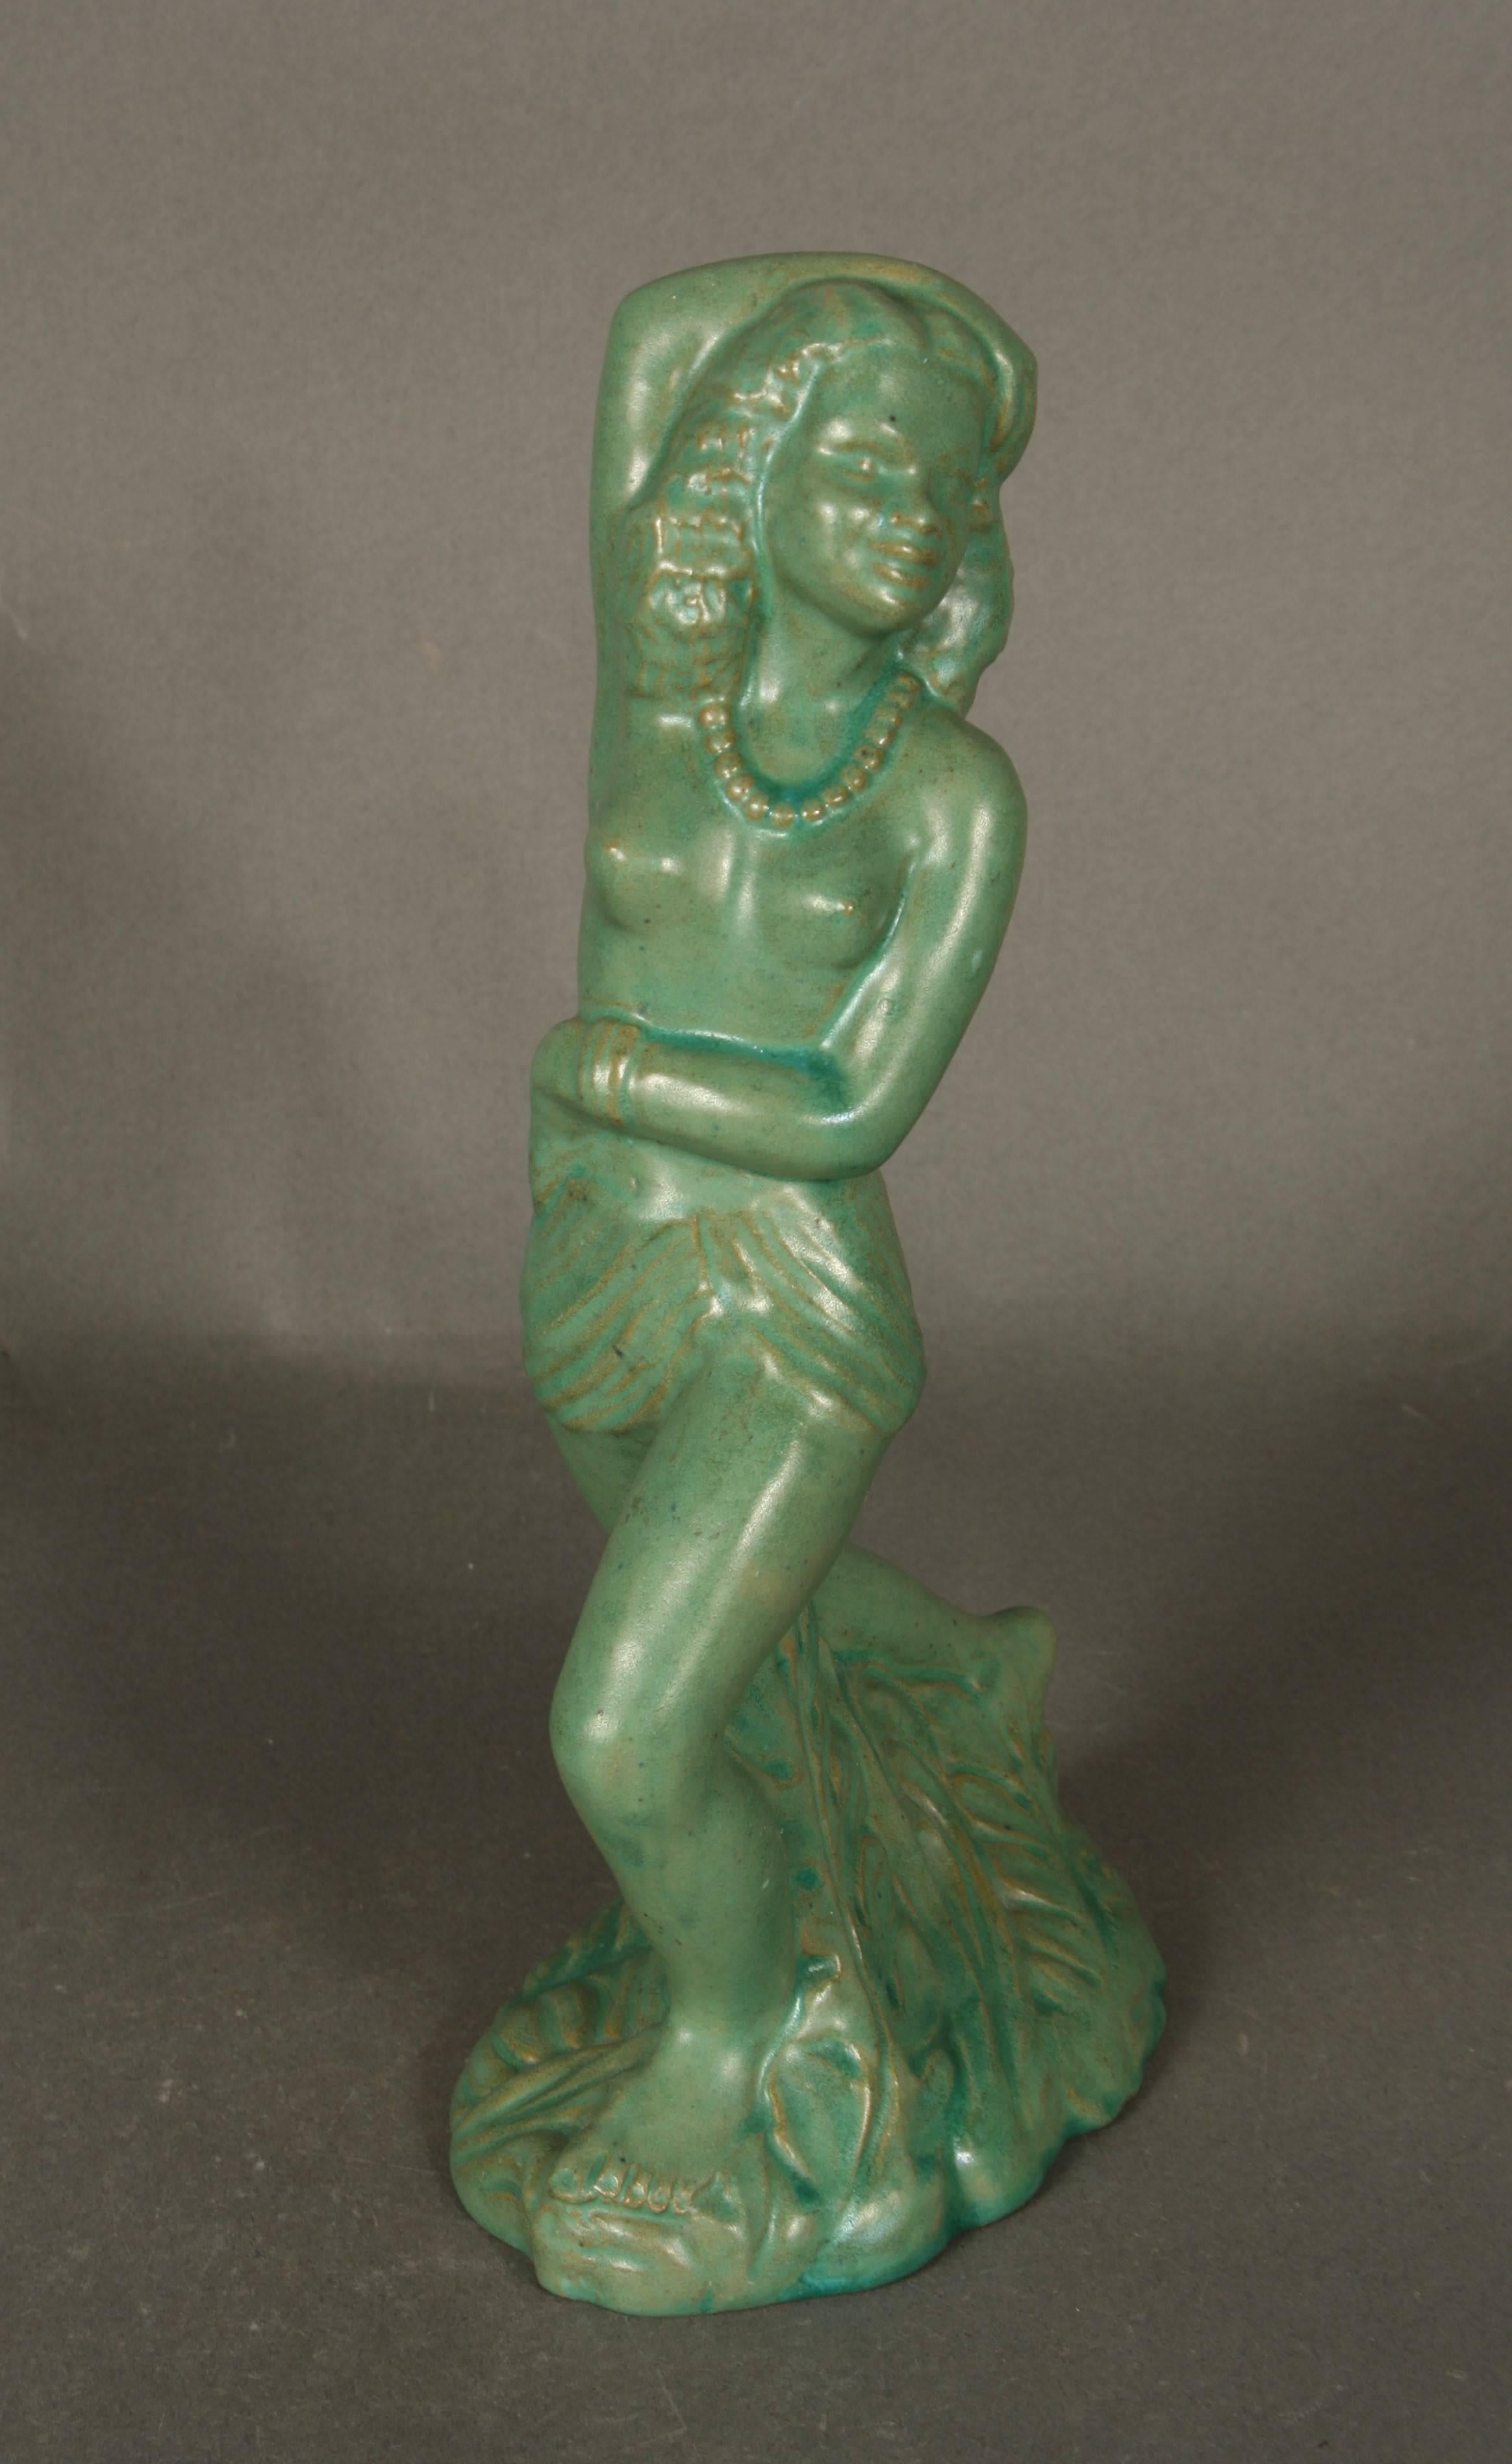 Hawaii Girl, Scandinavian midcentury by Ove Frits Rasmussen, Denmark. Shes beautiful and in a lovely green glaze.